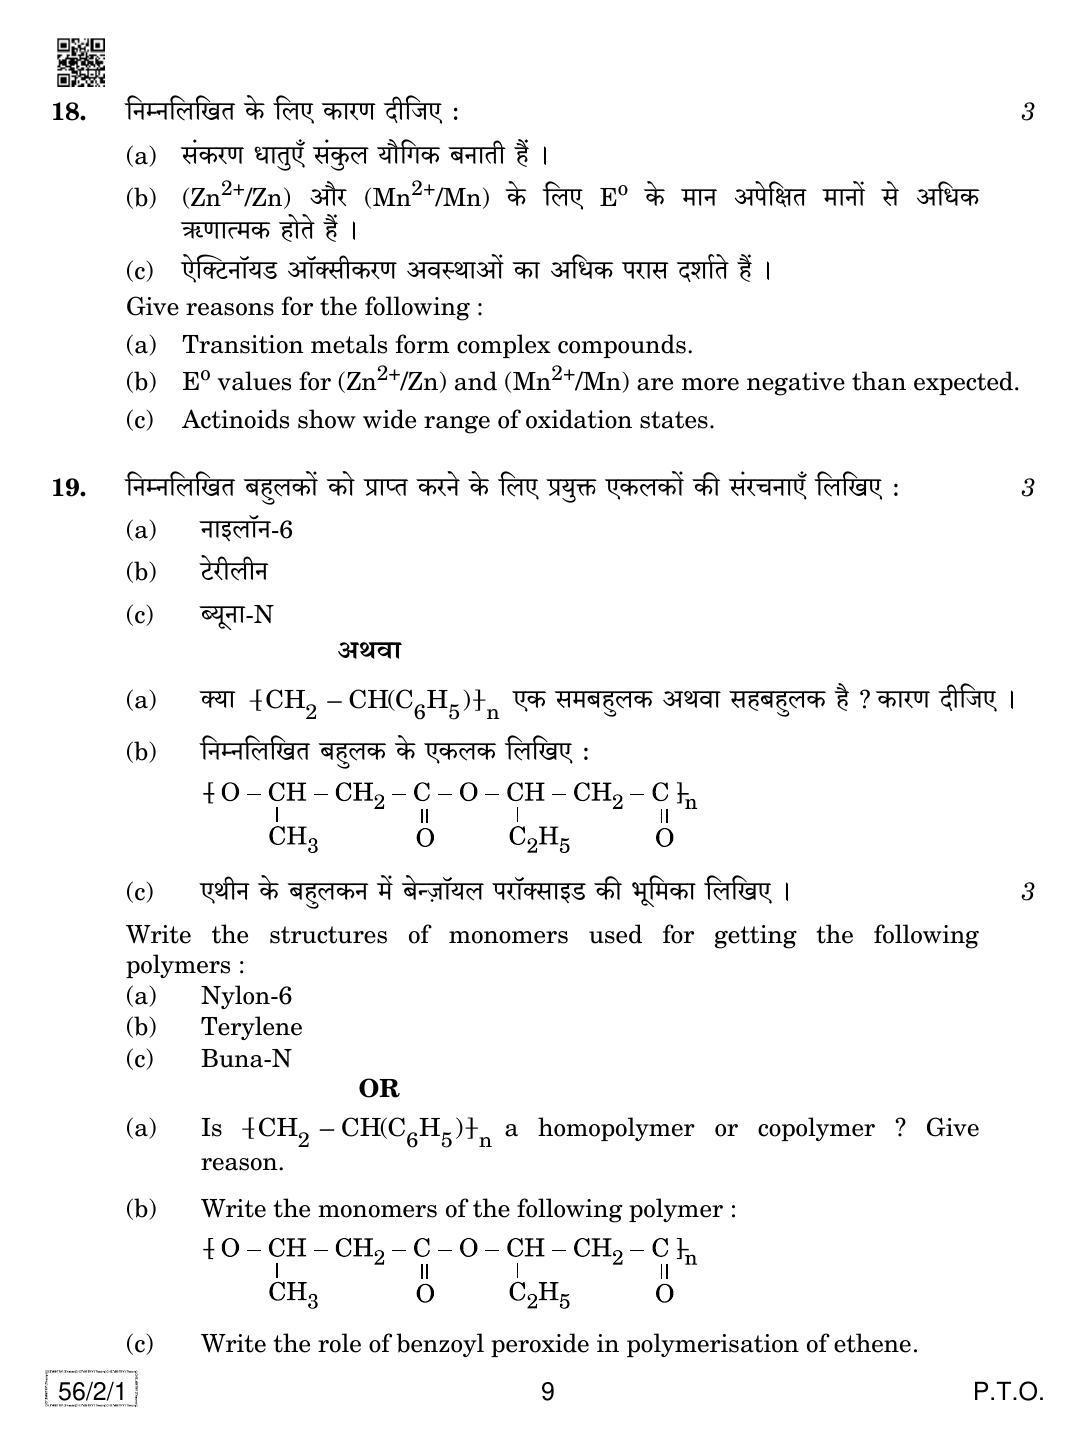 CBSE Class 12 56-2-1 Chemistry 2019 Question Paper - Page 9